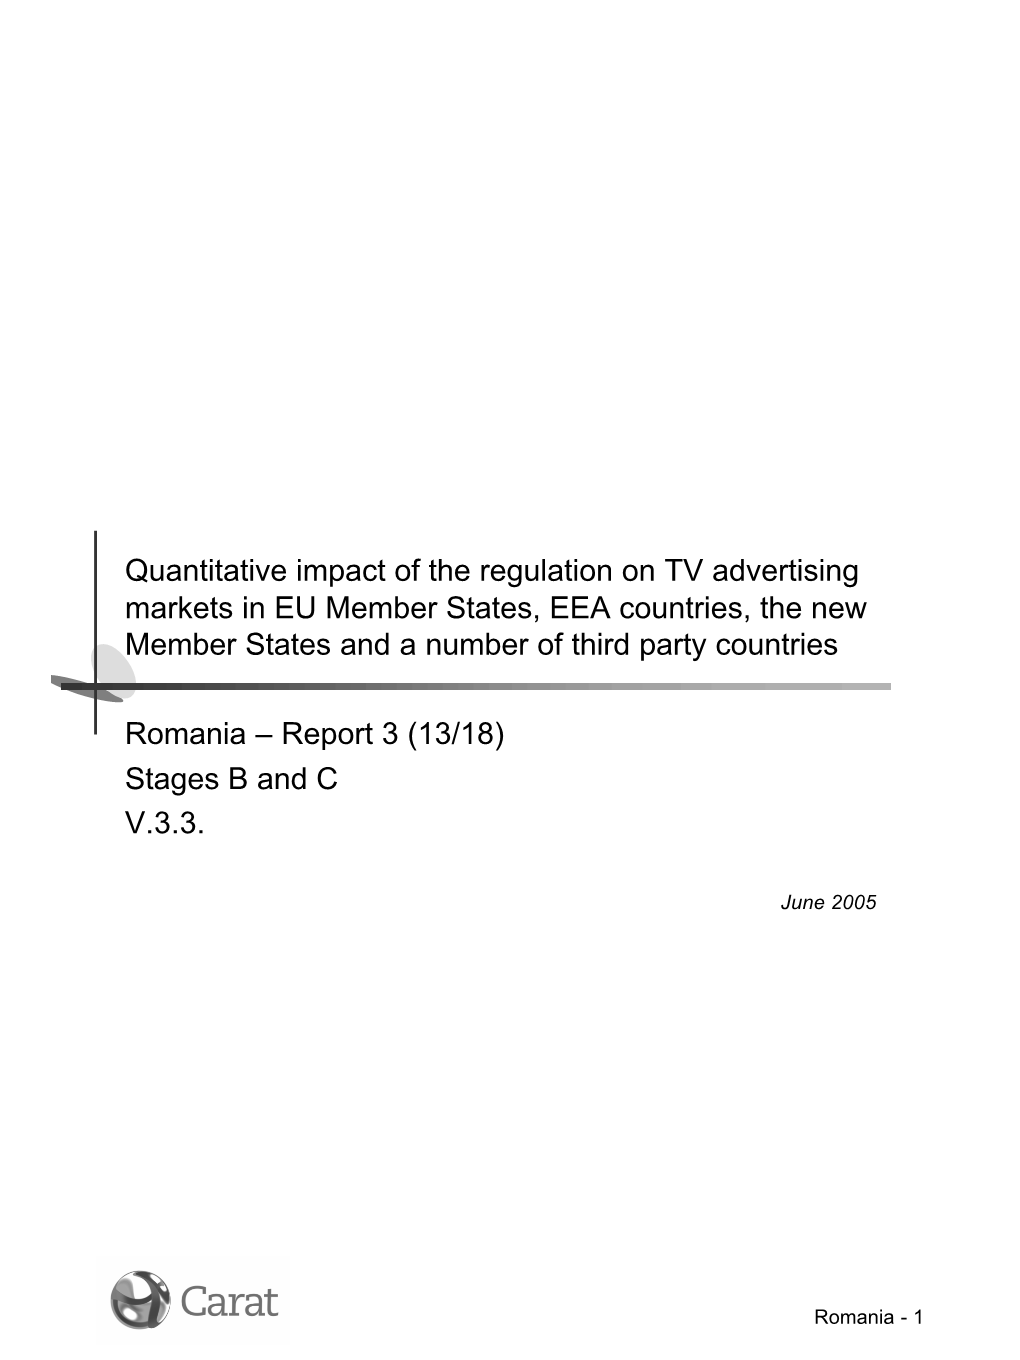 Quantitative Impact of the Regulation on TV Advertising Markets in EU Member States, EEA Countries, the New Member States and a Number of Third Party Countries